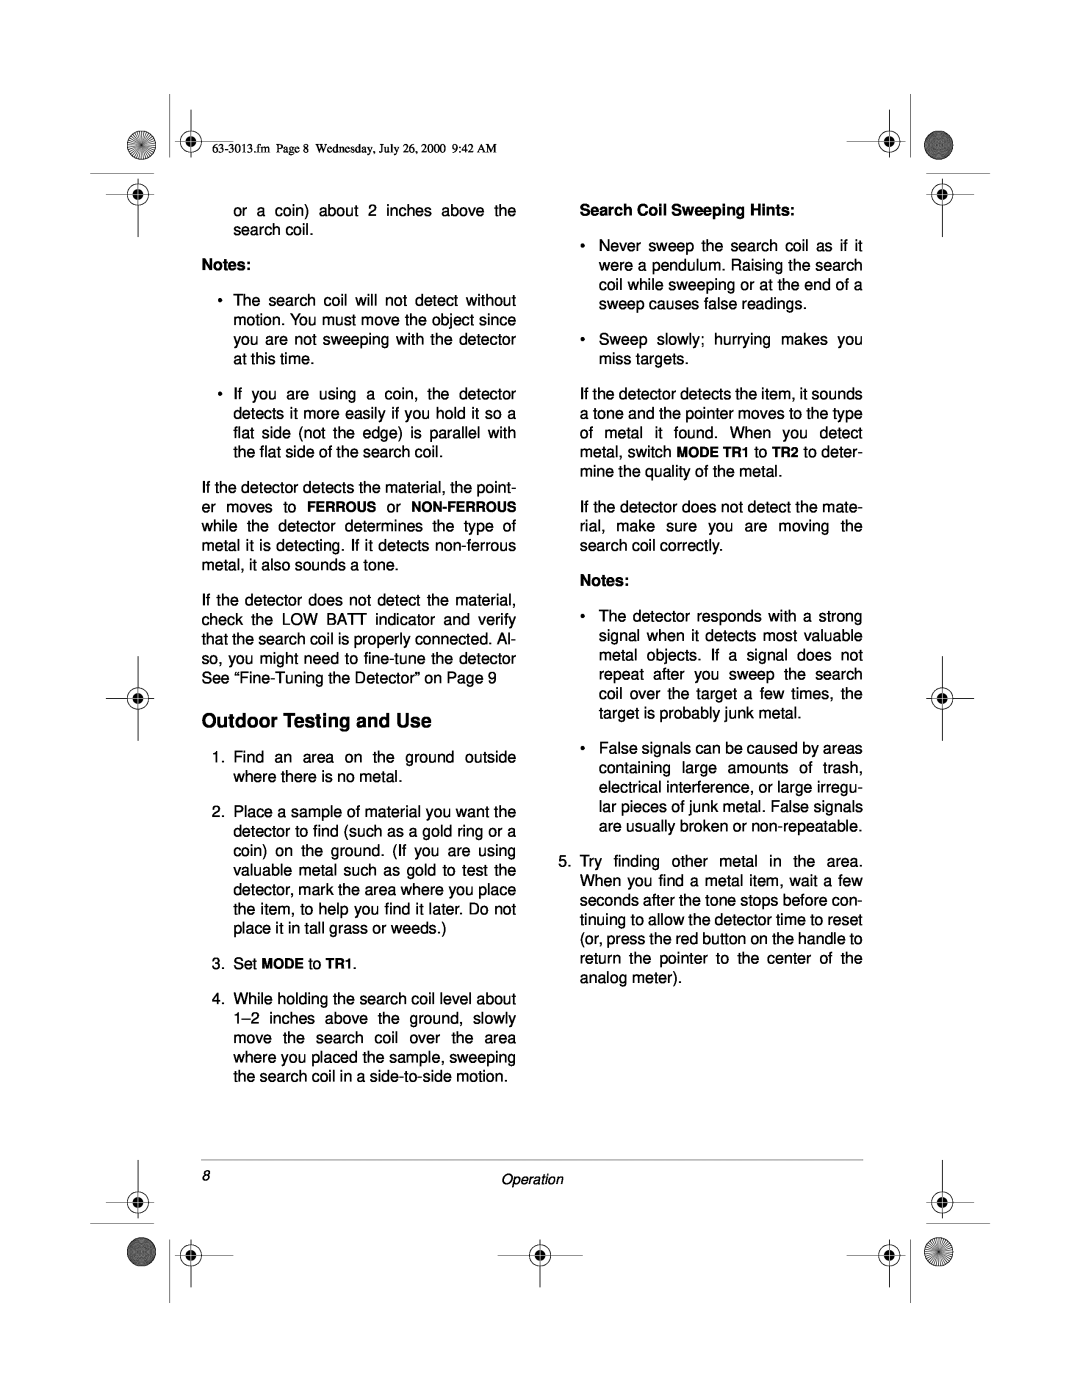 Radio Shack 63-3013 owner manual Outdoor Testing and Use, Search Coil Sweeping Hints, Notes 